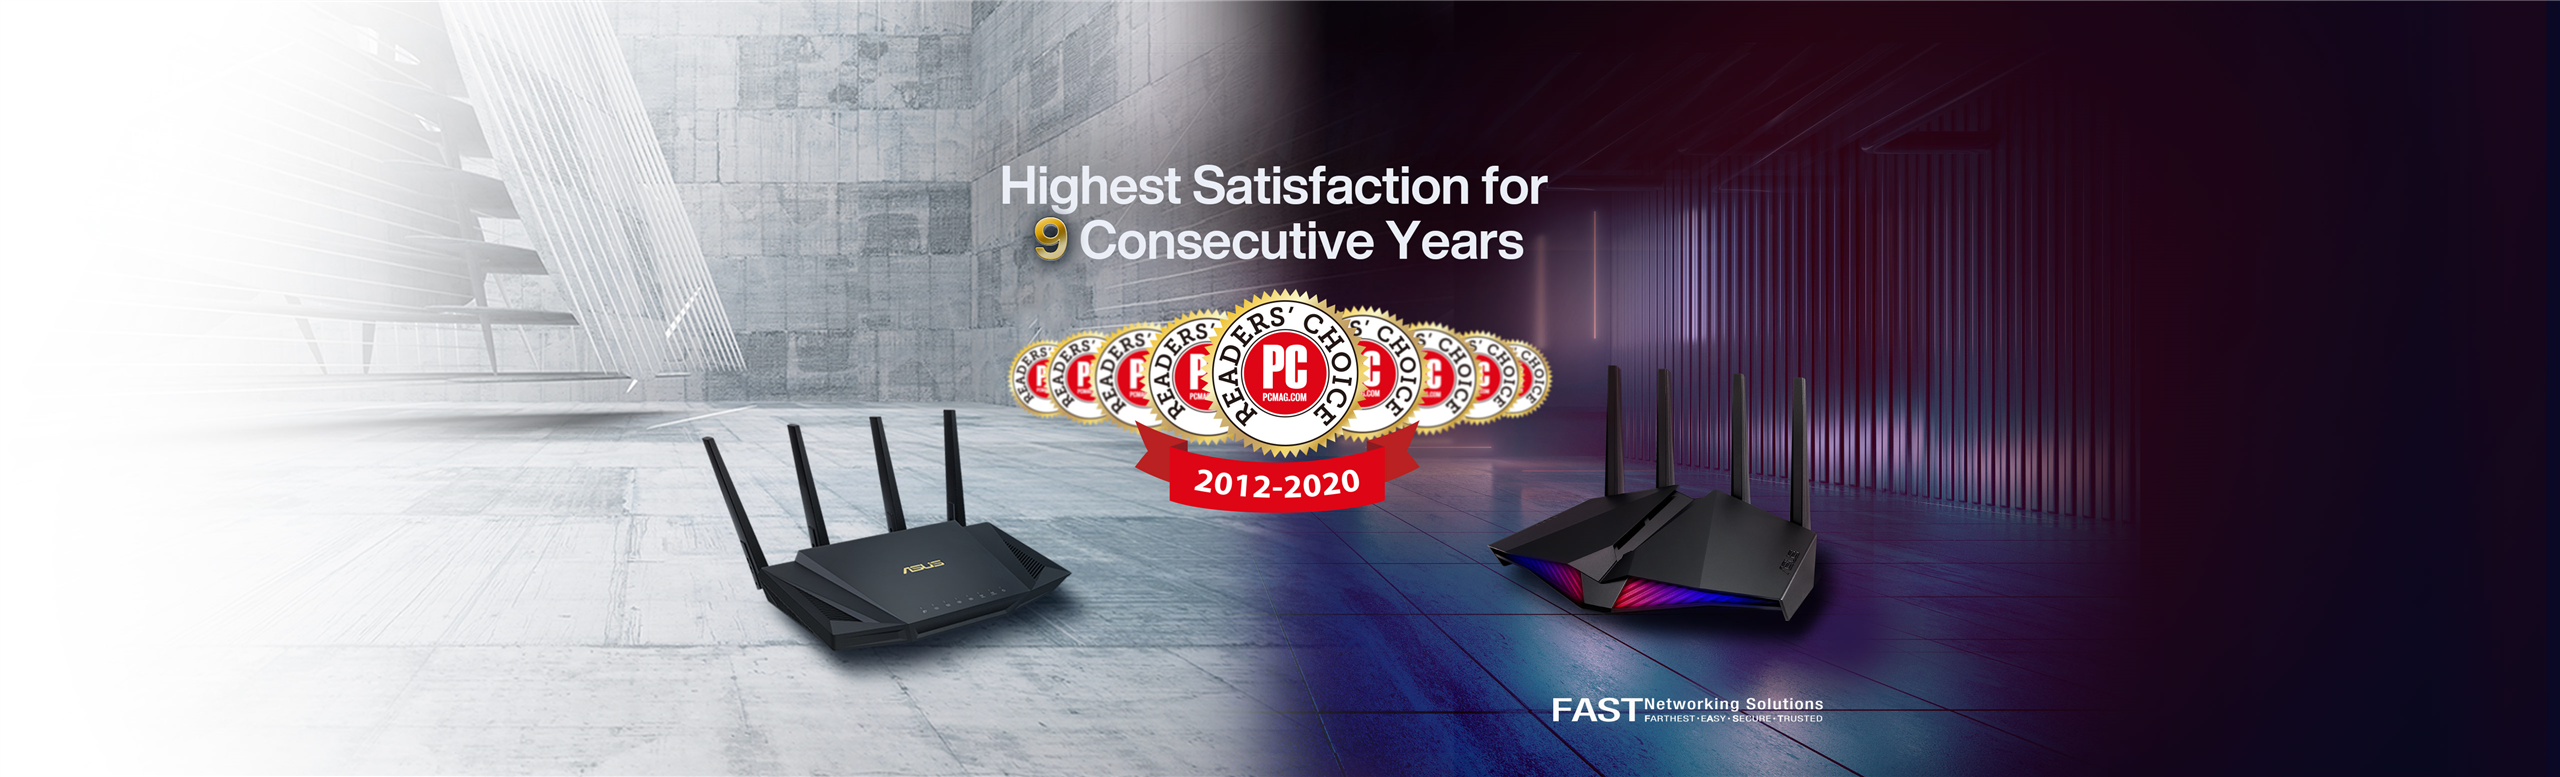 ASUS routers have won highest satisfaction for 9 consecutive years